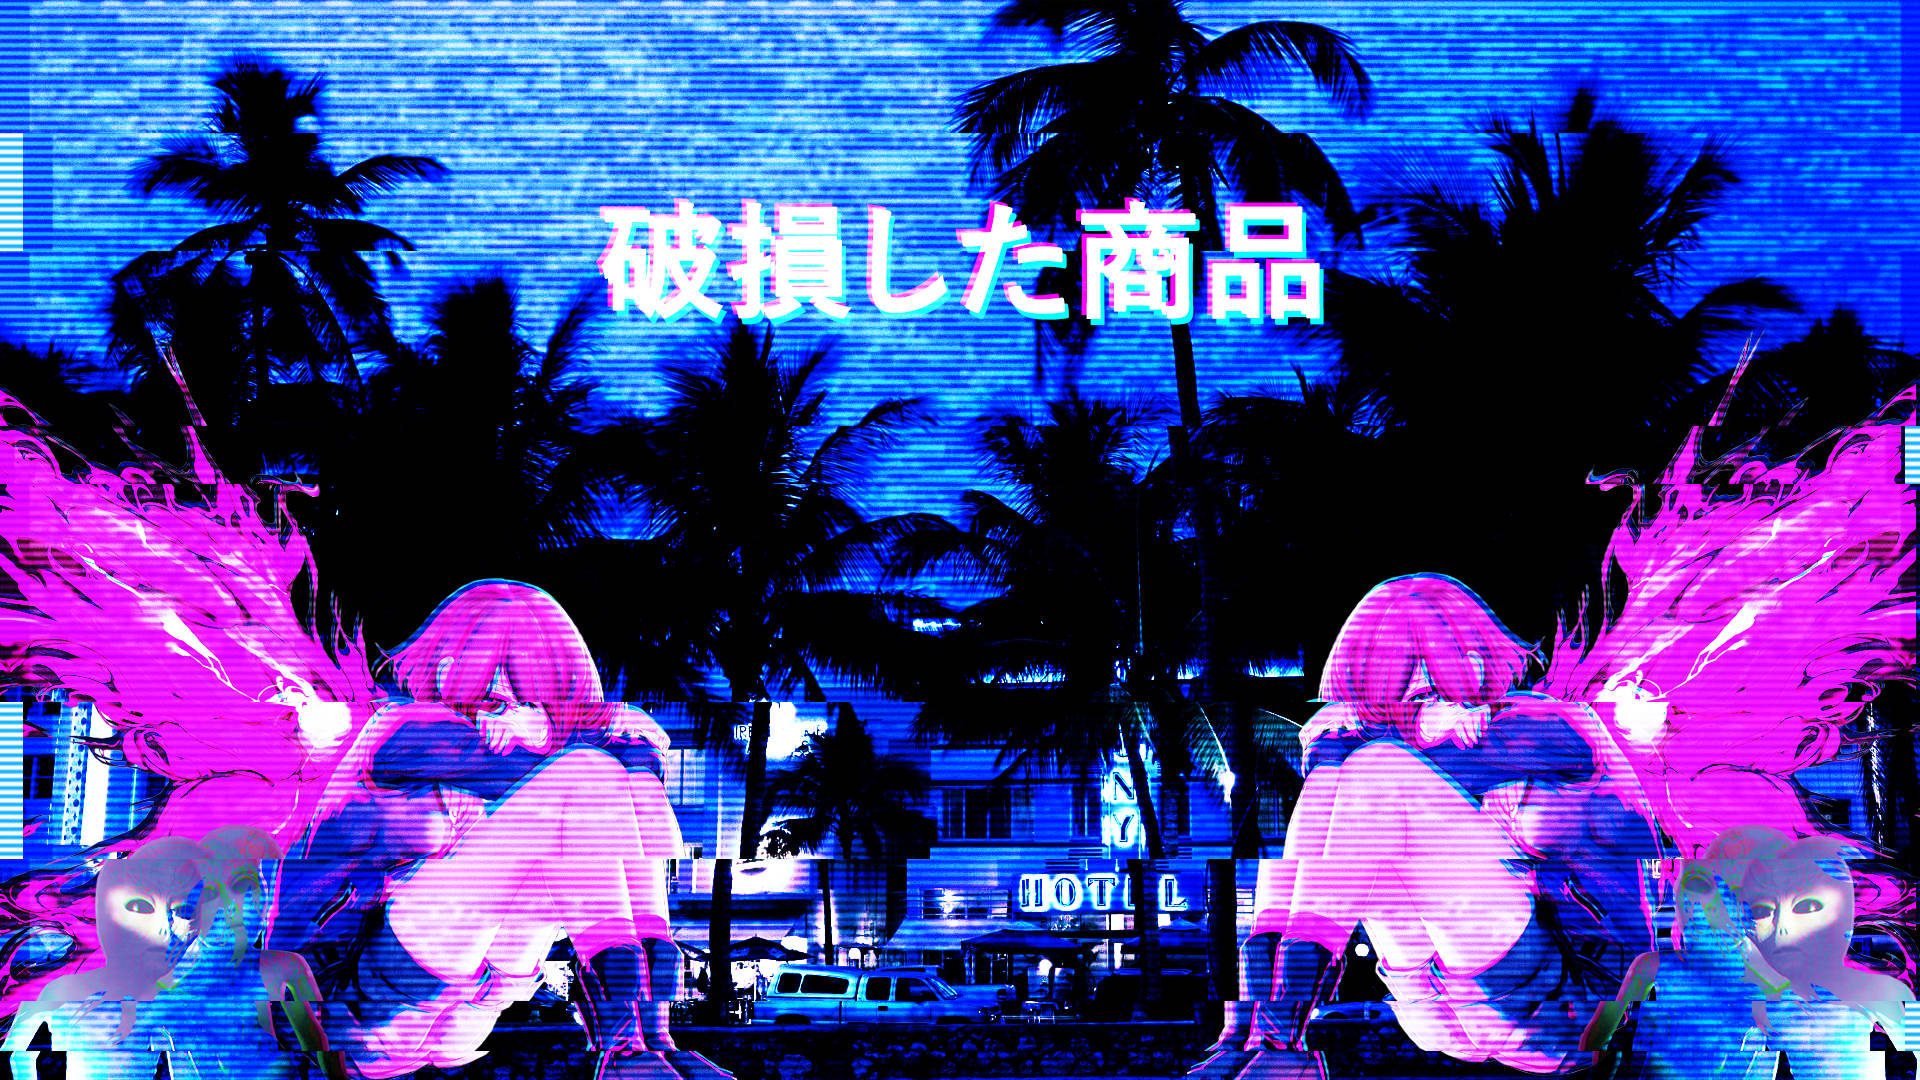 Anime Aesthetic Painting Wallpapers